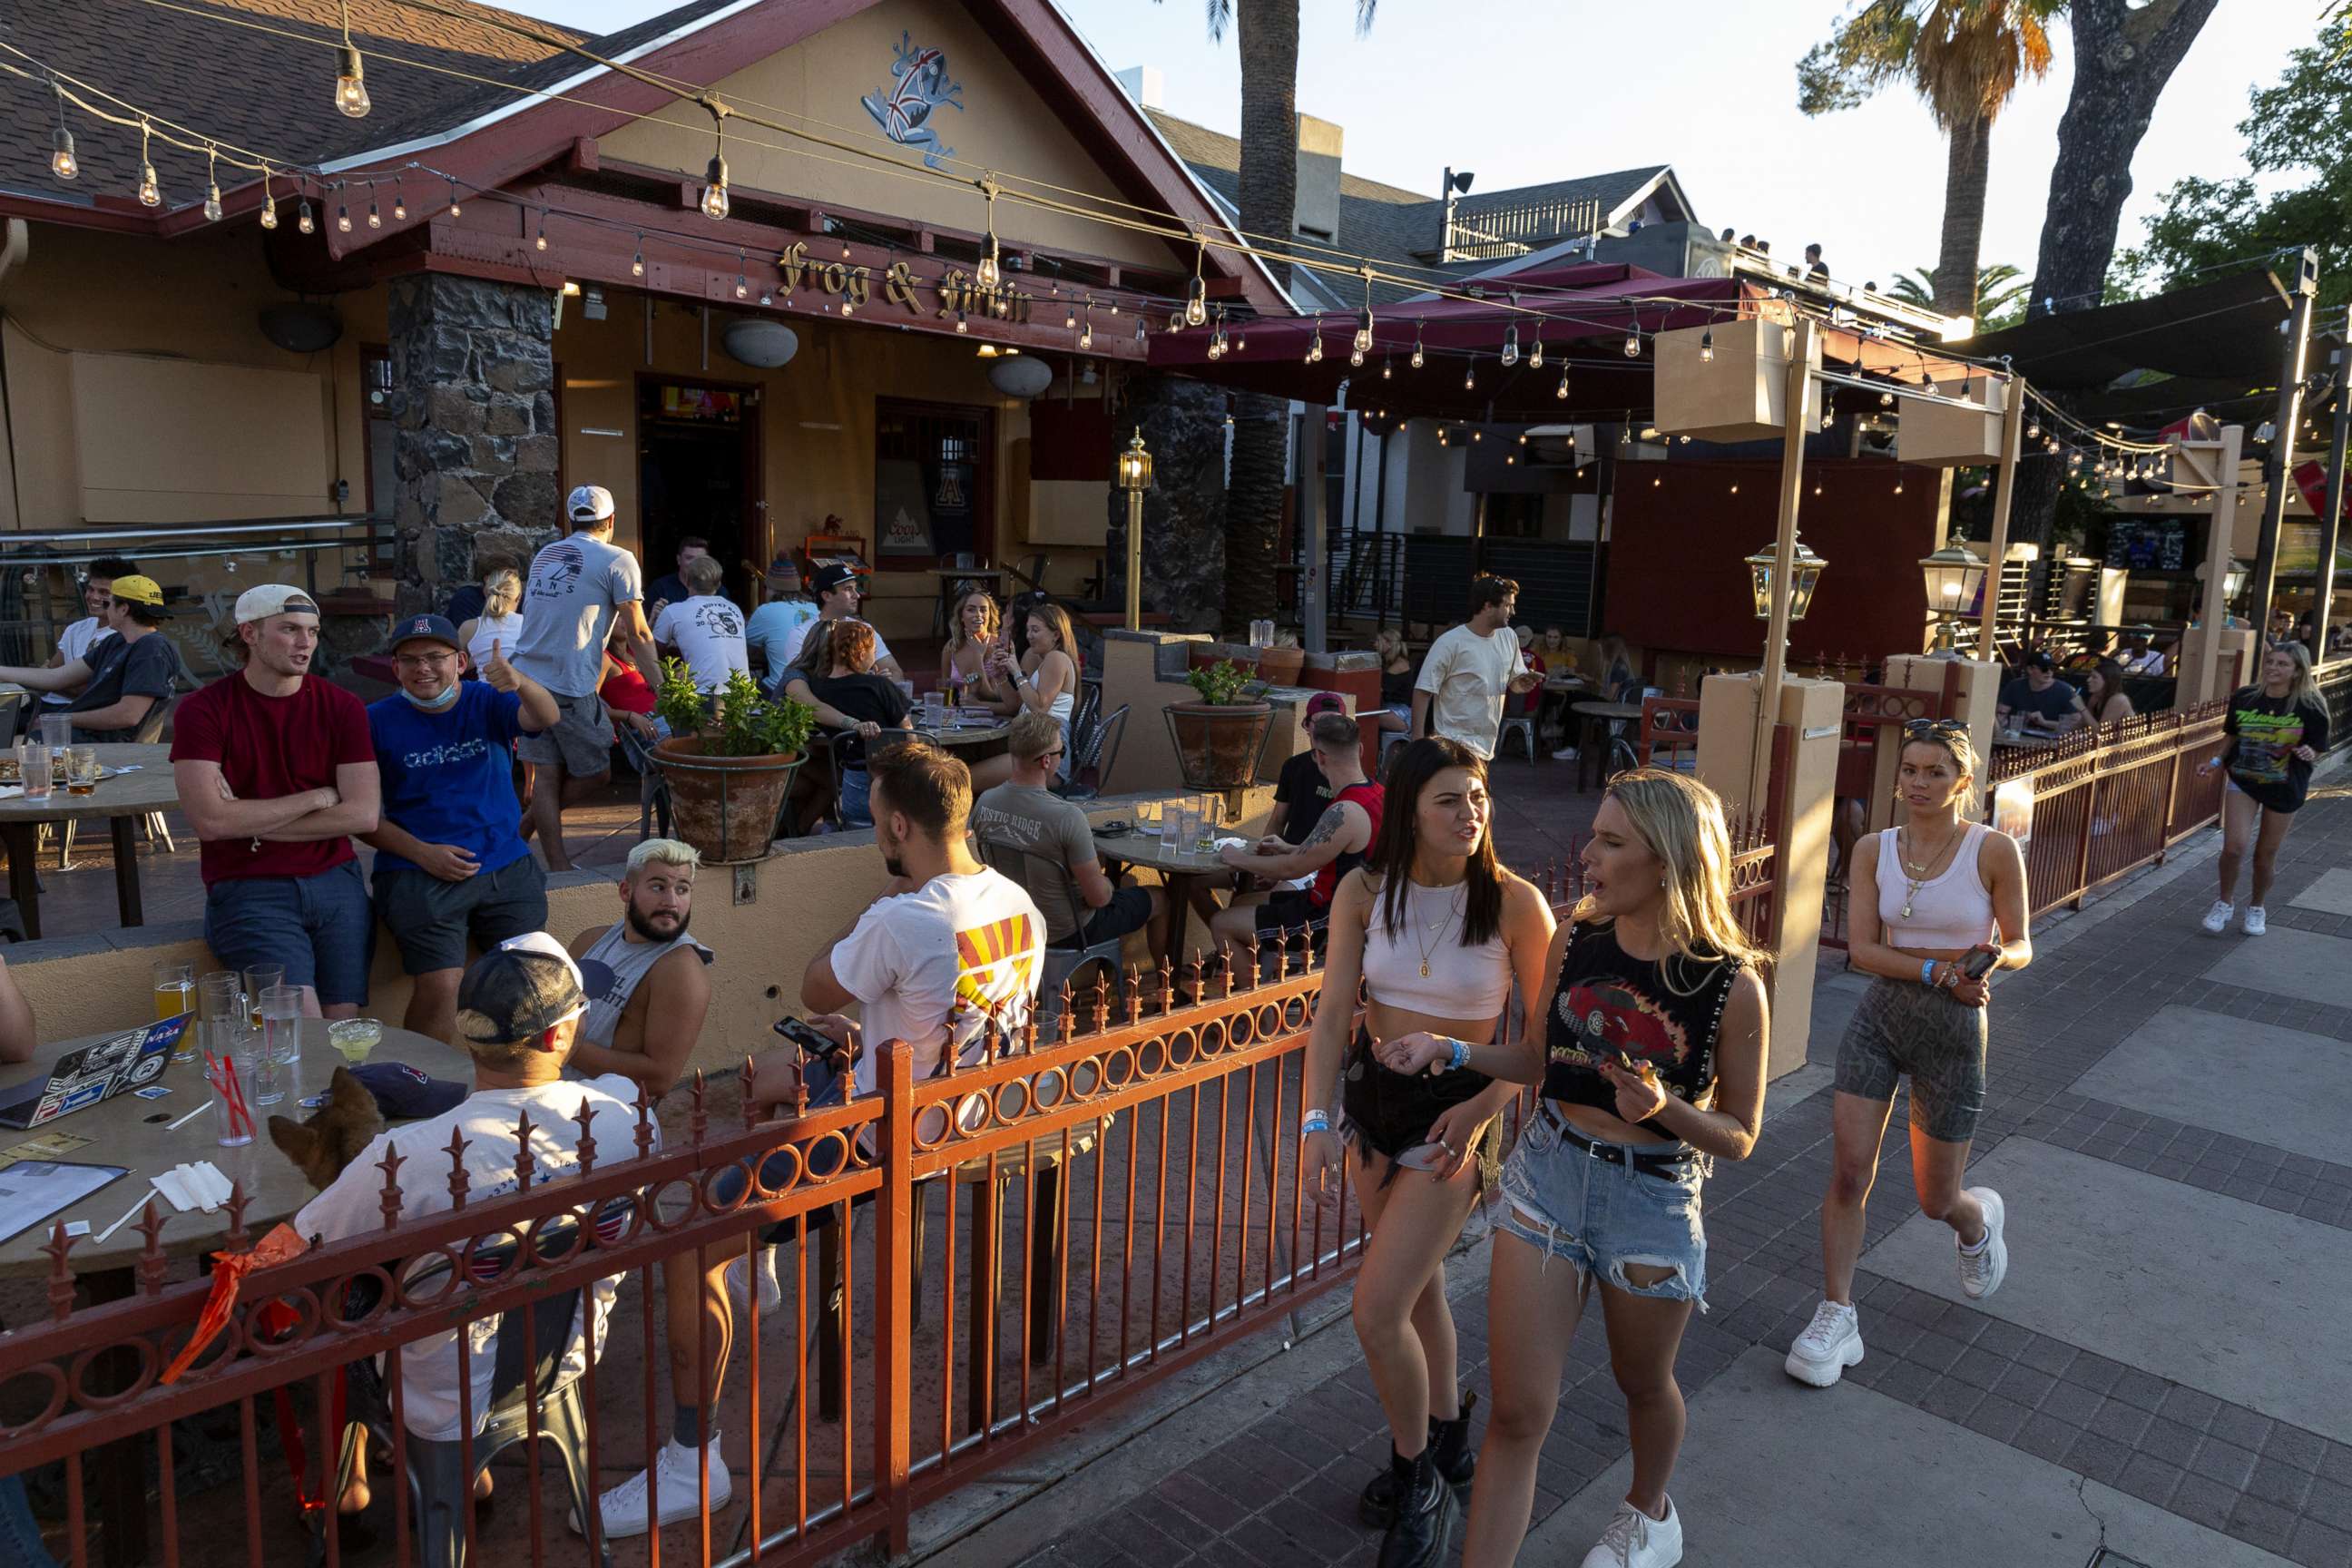 PHOTO: Pedestrians walk past customers sitting outside at a bar in Tucson, Arizona, May 11, 2020.